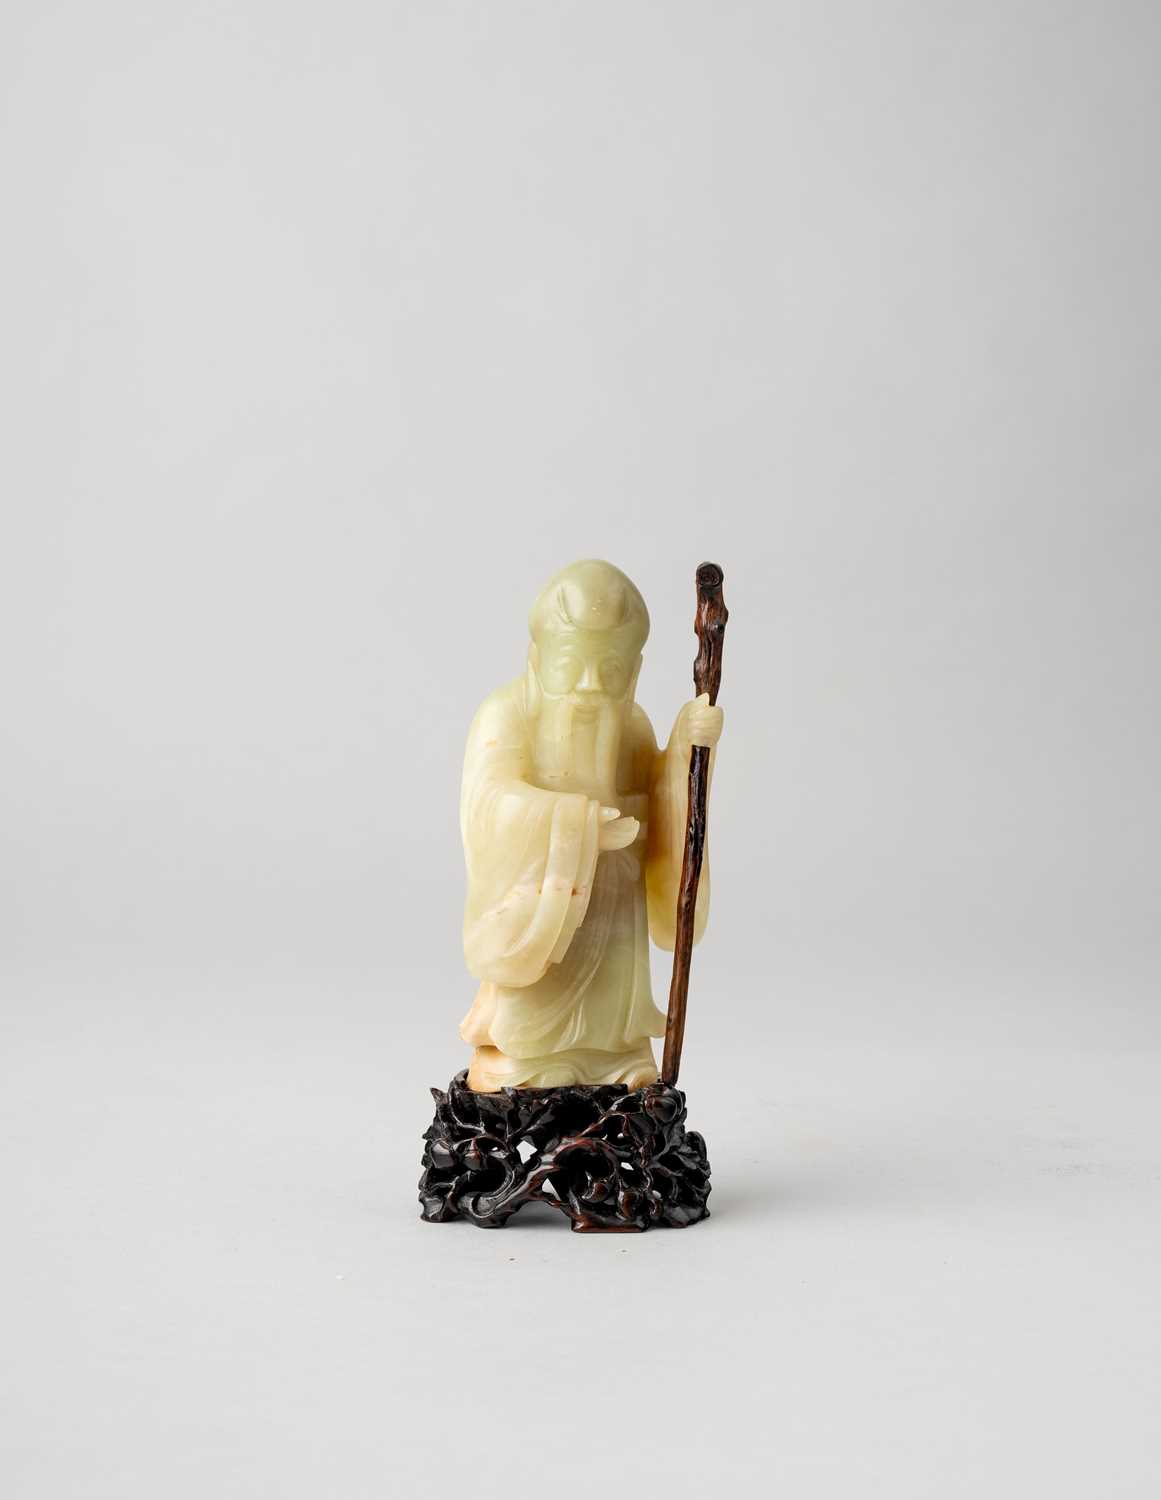 A CHINESE YELLOW JADE CARVING OF SHOULAO 18TH CENTURY The smiling deity wearing flowing robes